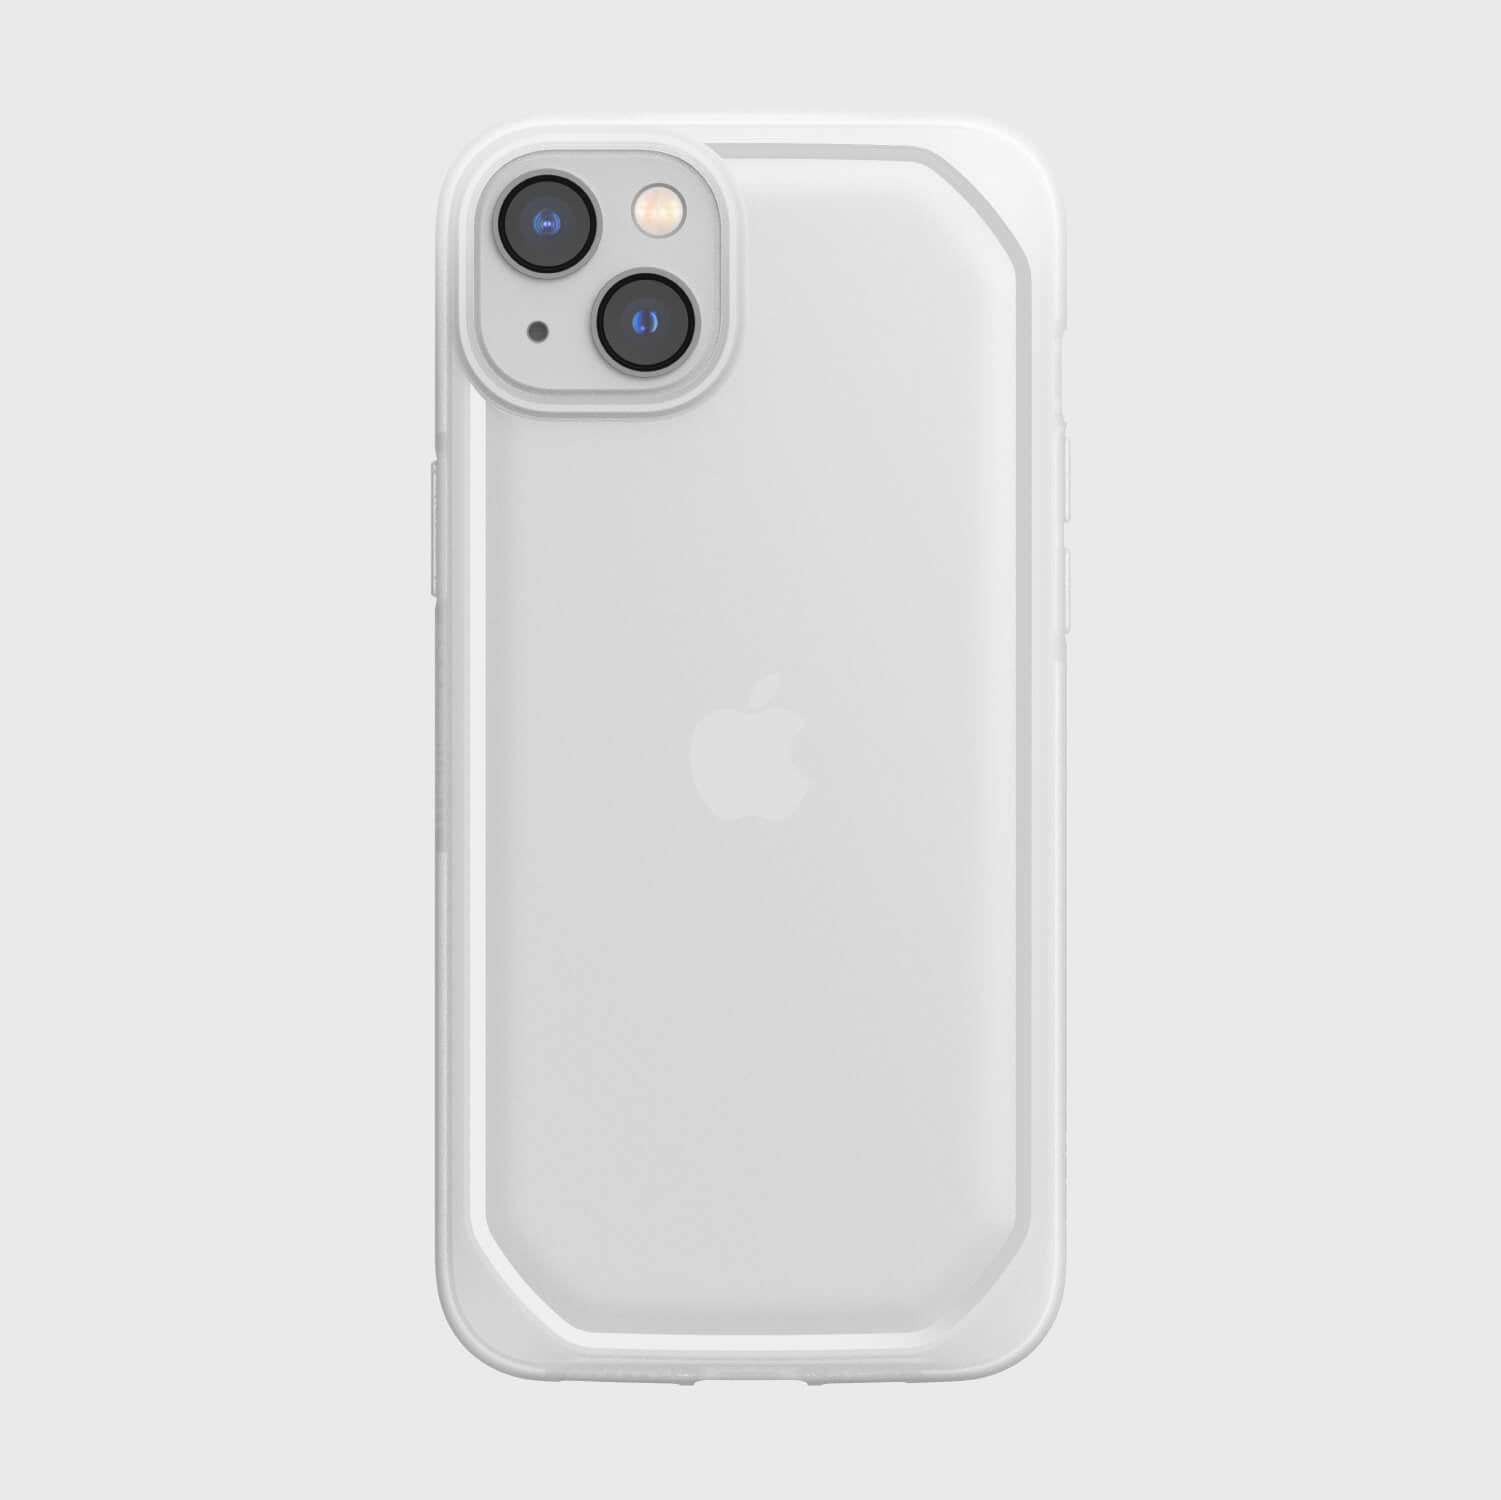 The environmentally friendly Raptic white iPhone 11 case with texturing depth.